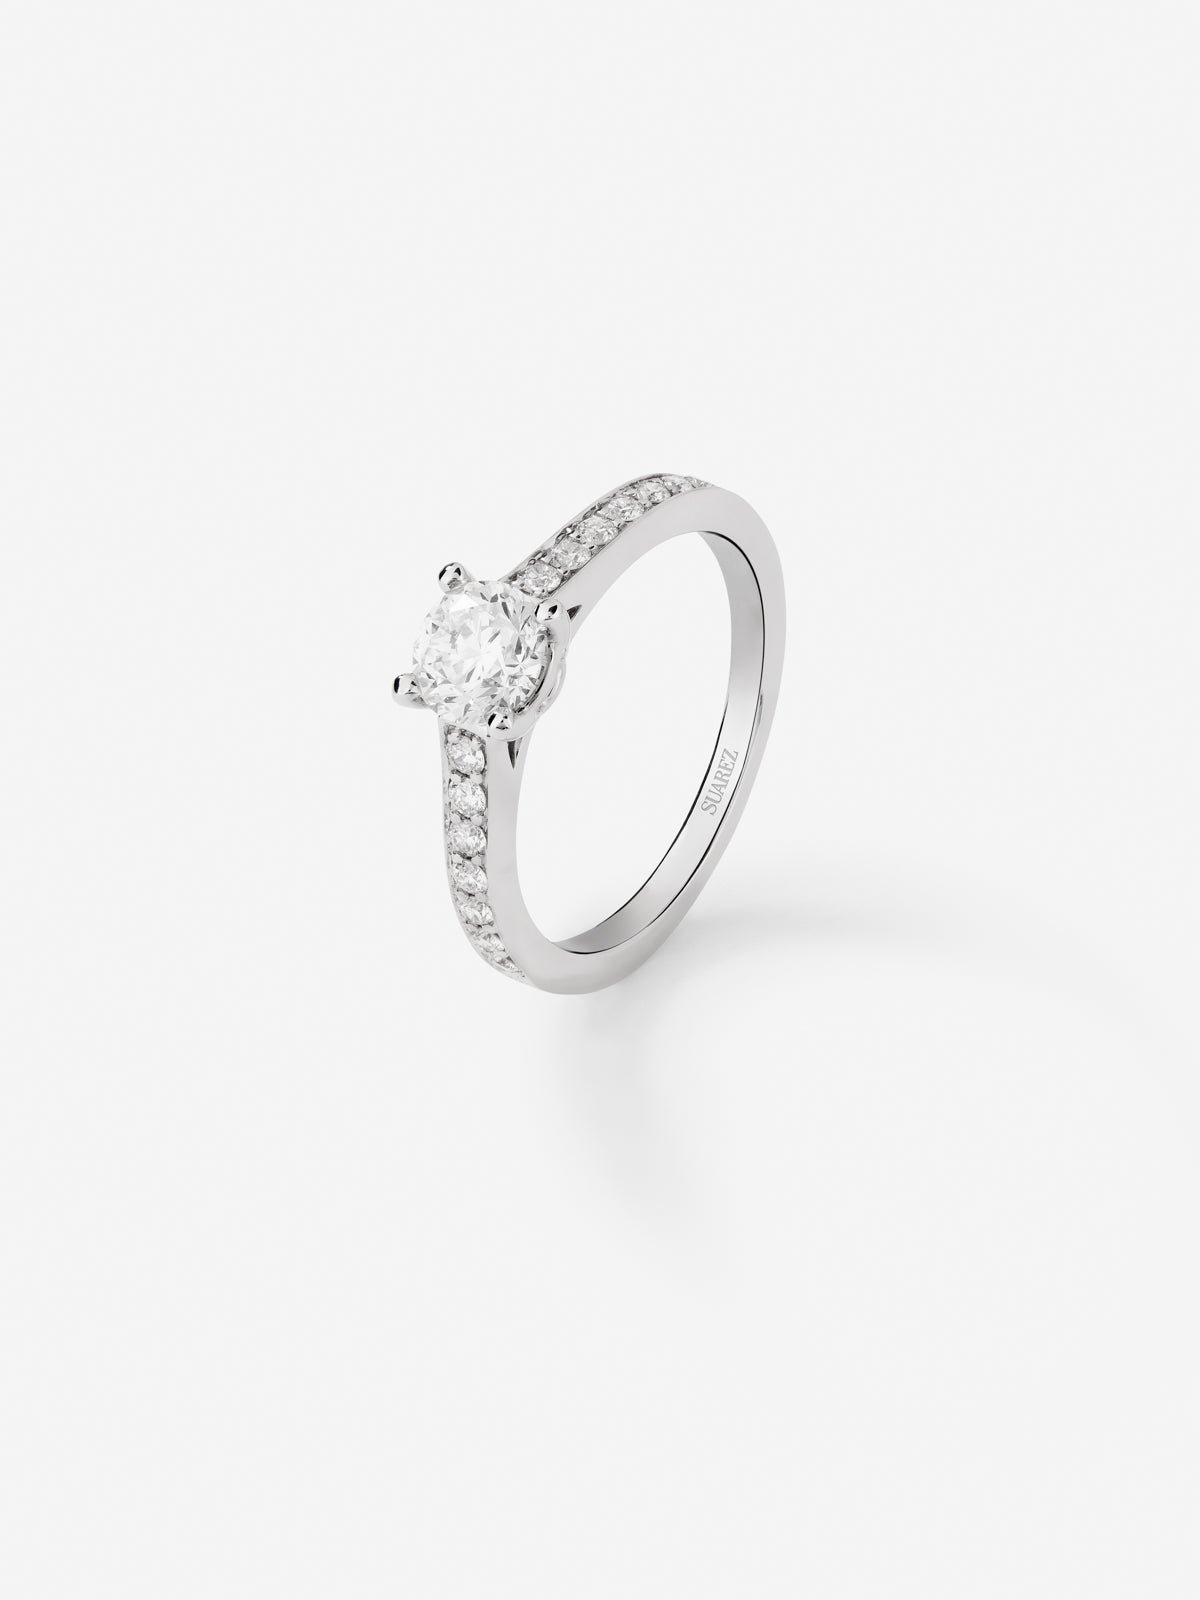 18K white gold solitary engagement ring with diamonds